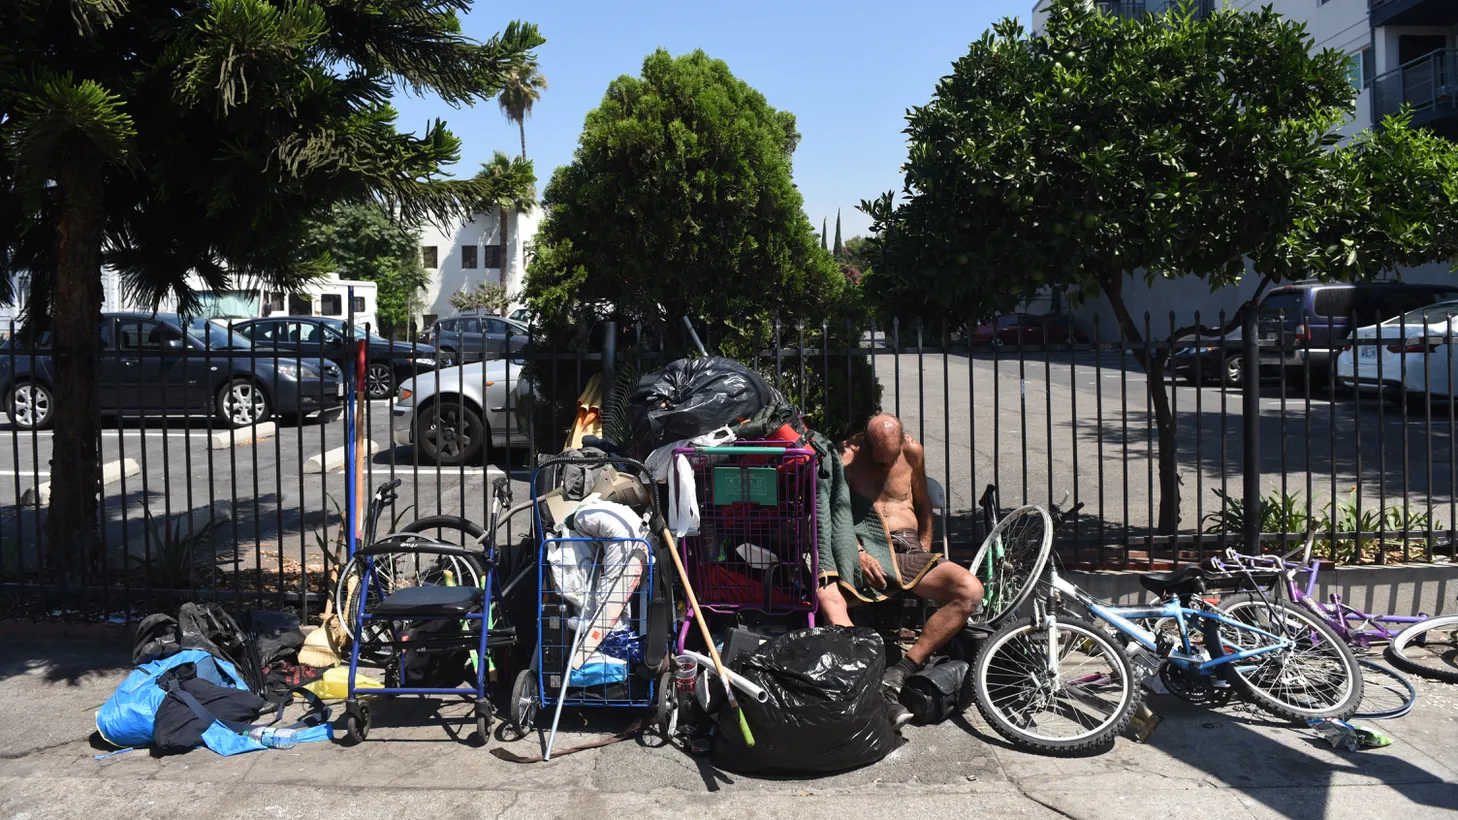 Most bike thefts in LA have gone unsolved, according to a Los Angeles Times analysis of crime data. Opponents of a proposed bike repair and sale ban say the city is baselessly blaming those thefts on unhoused people.